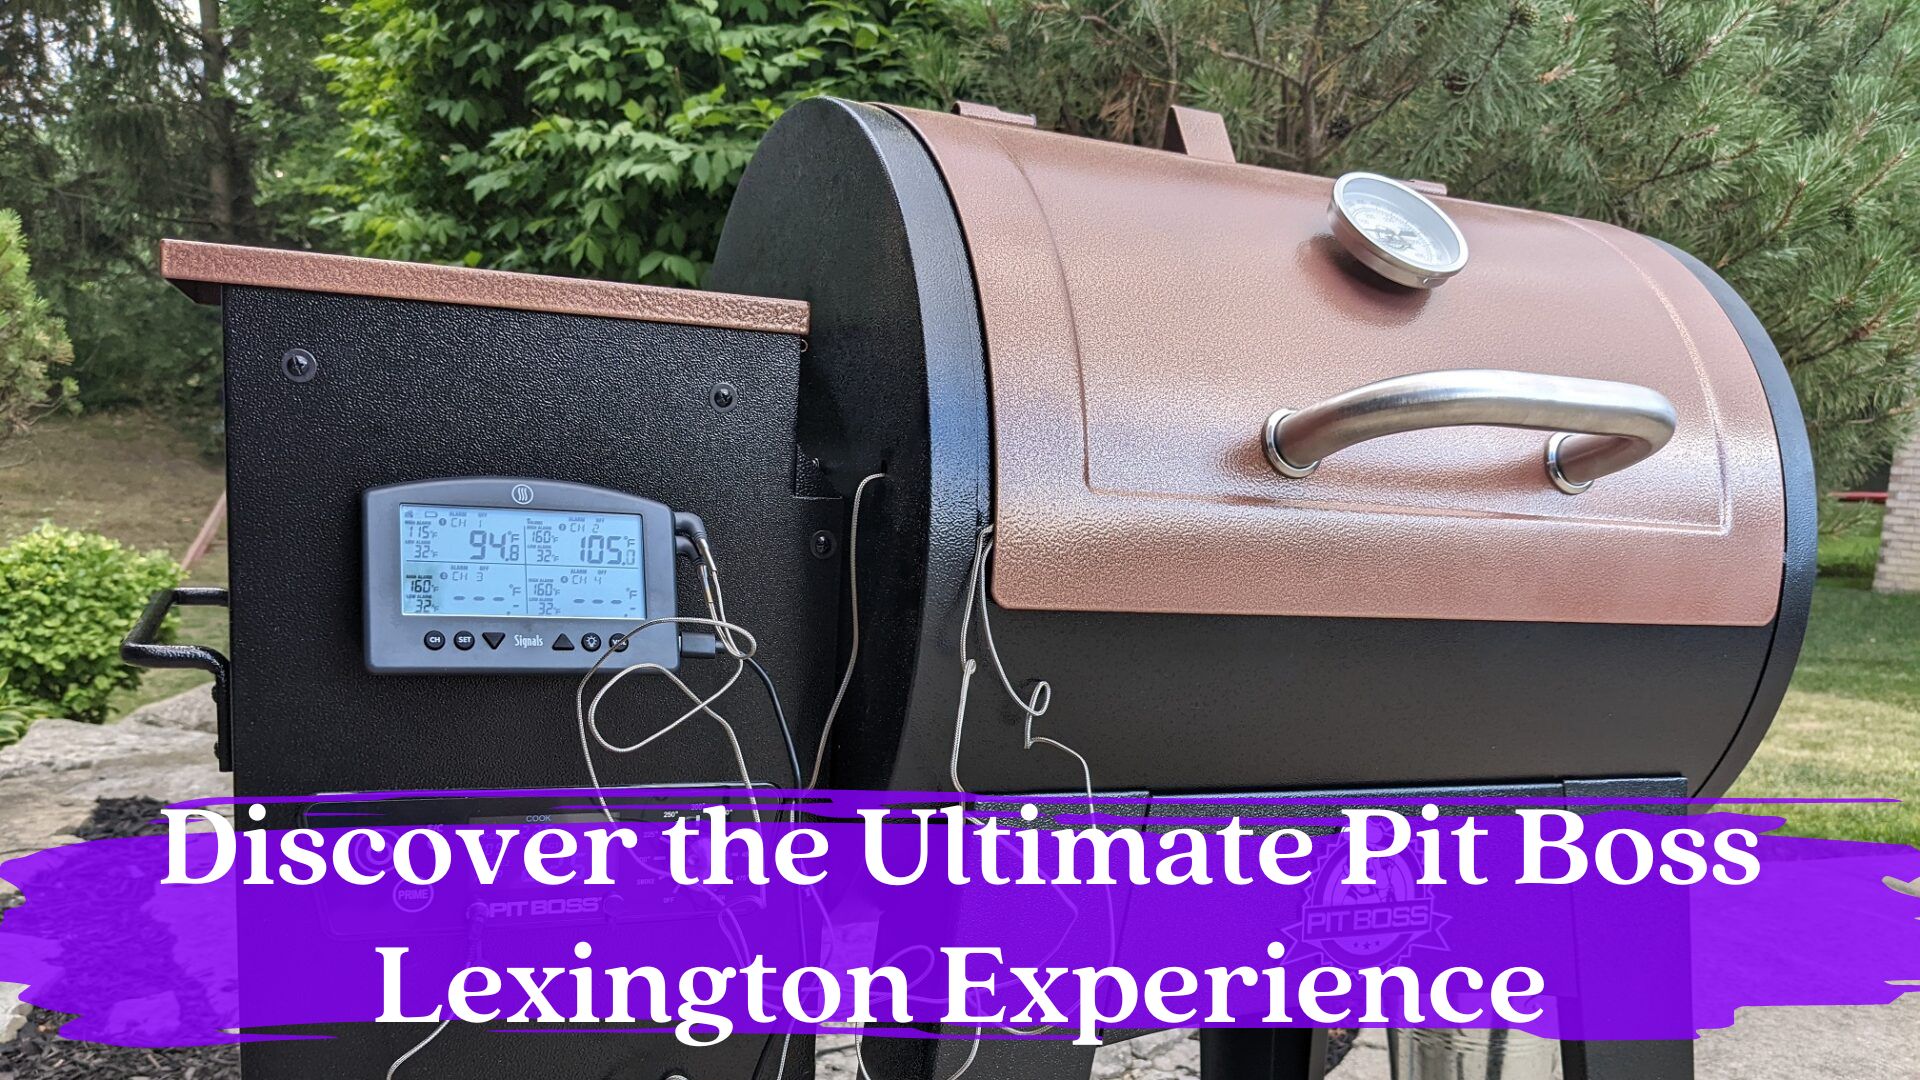 Discover the Ultimate Pit Boss Lexington Experience